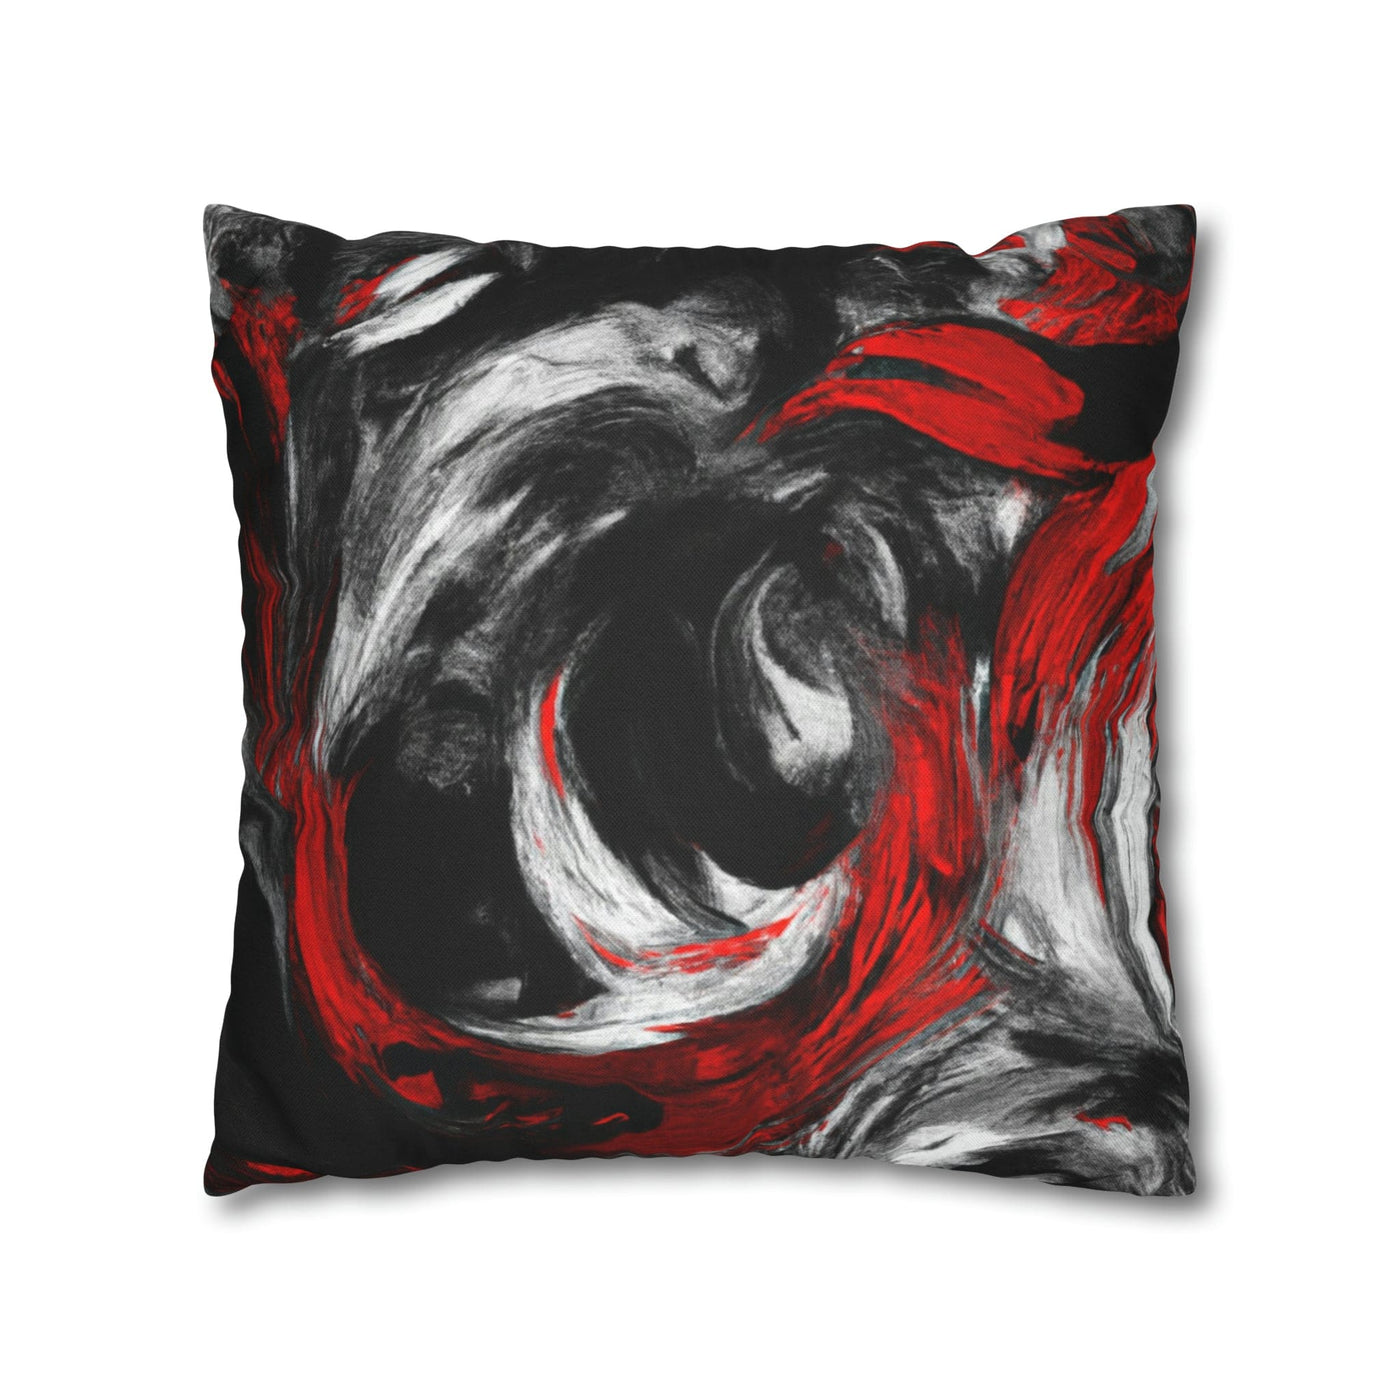 Decorative Throw Pillow Covers With Zipper - Set Of 2 Decorative Black Red